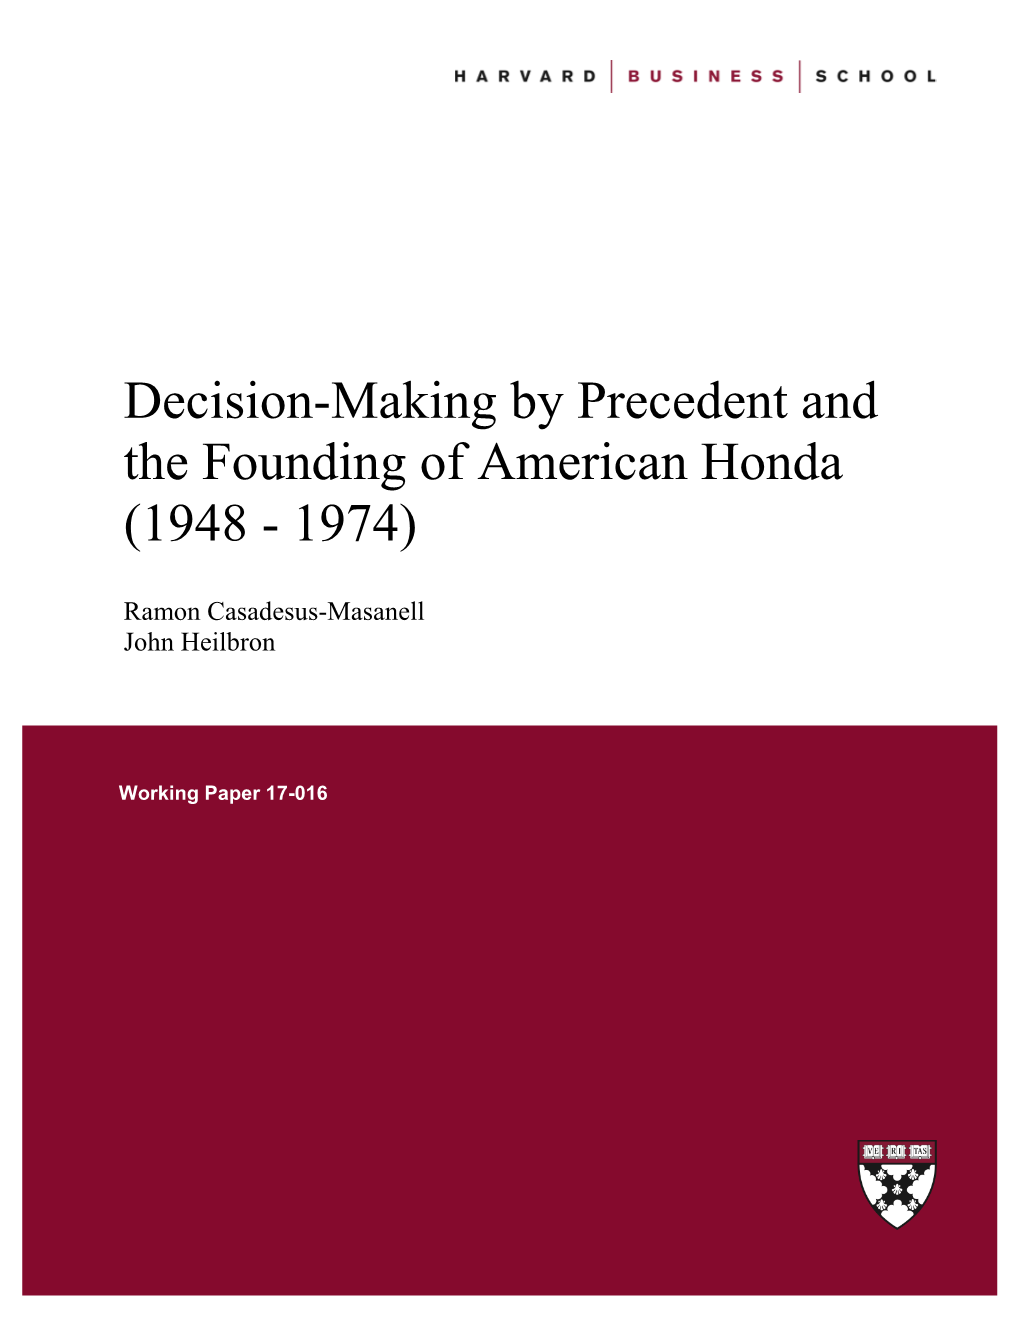 Decision-Making by Precedent and the Founding of American Honda (1948 - 1974)